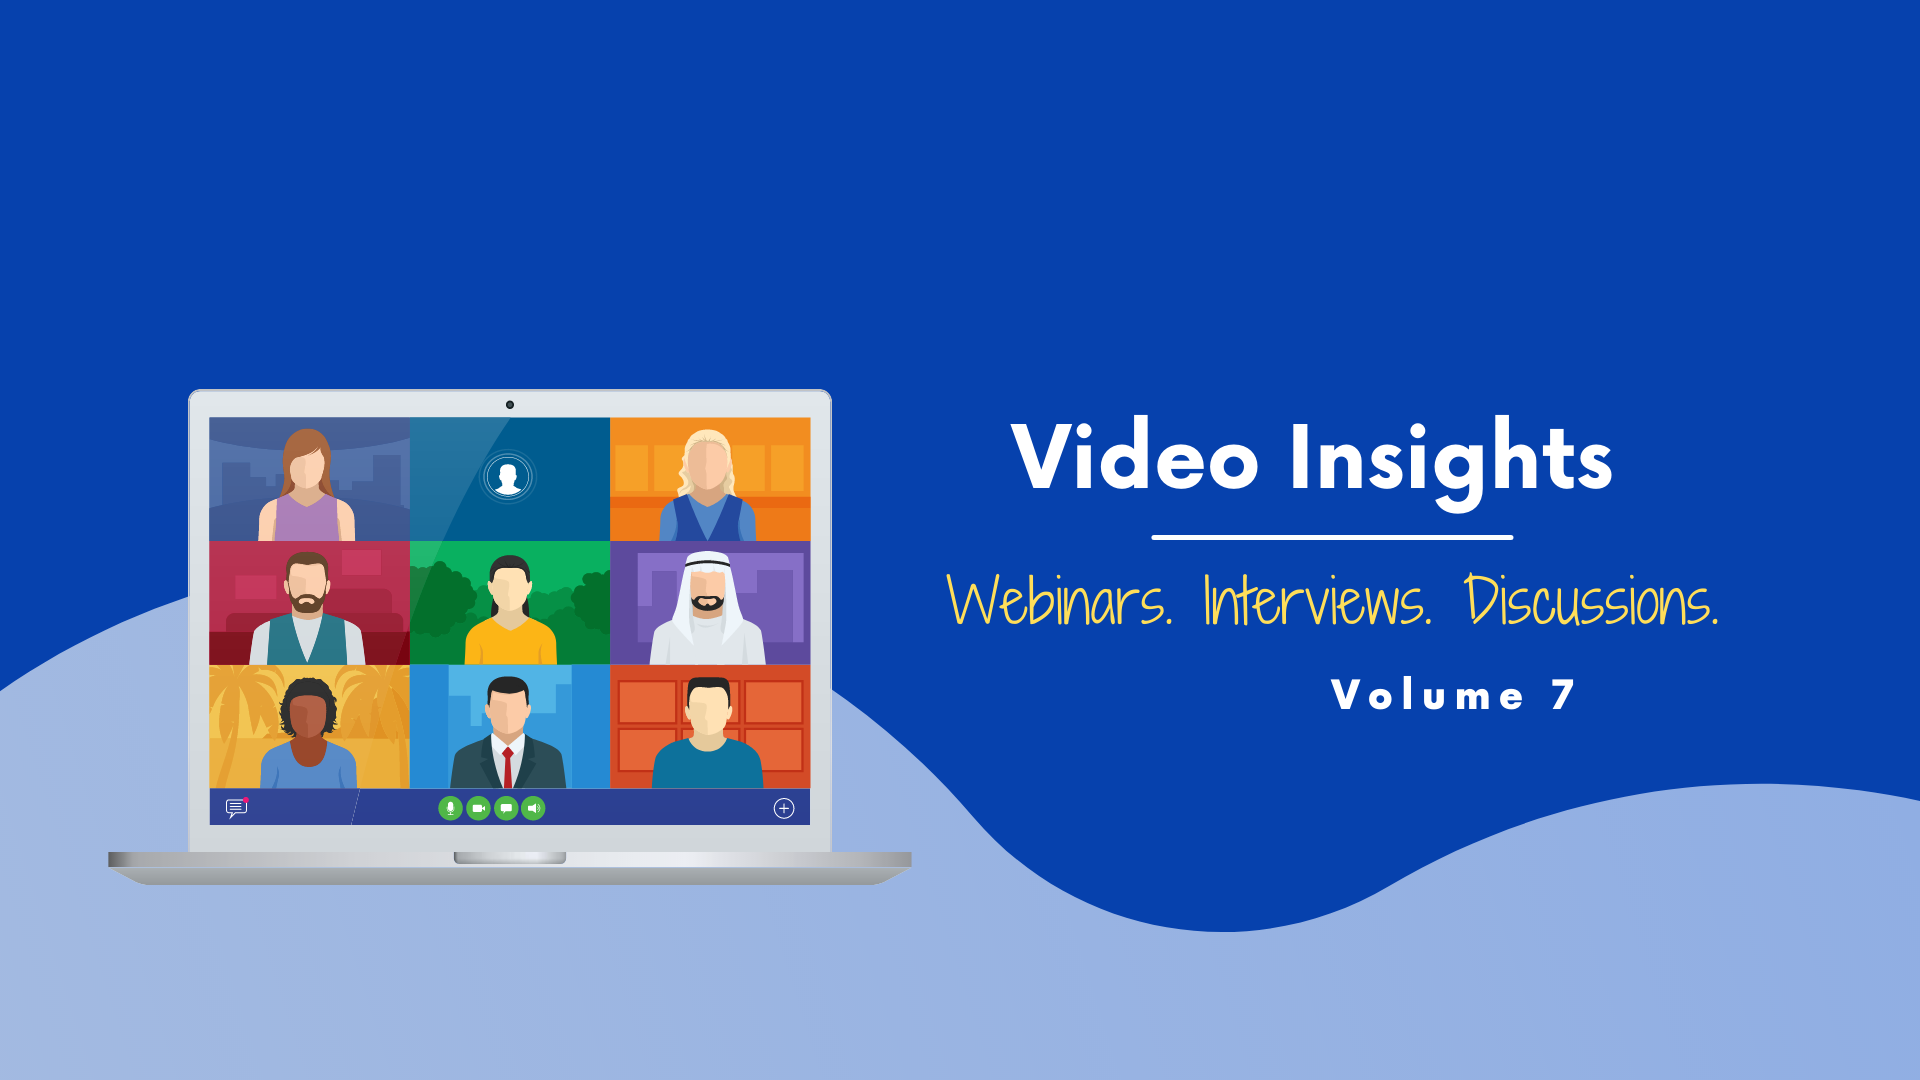 Video Insights: Webinars & Discussions (Volume 7)